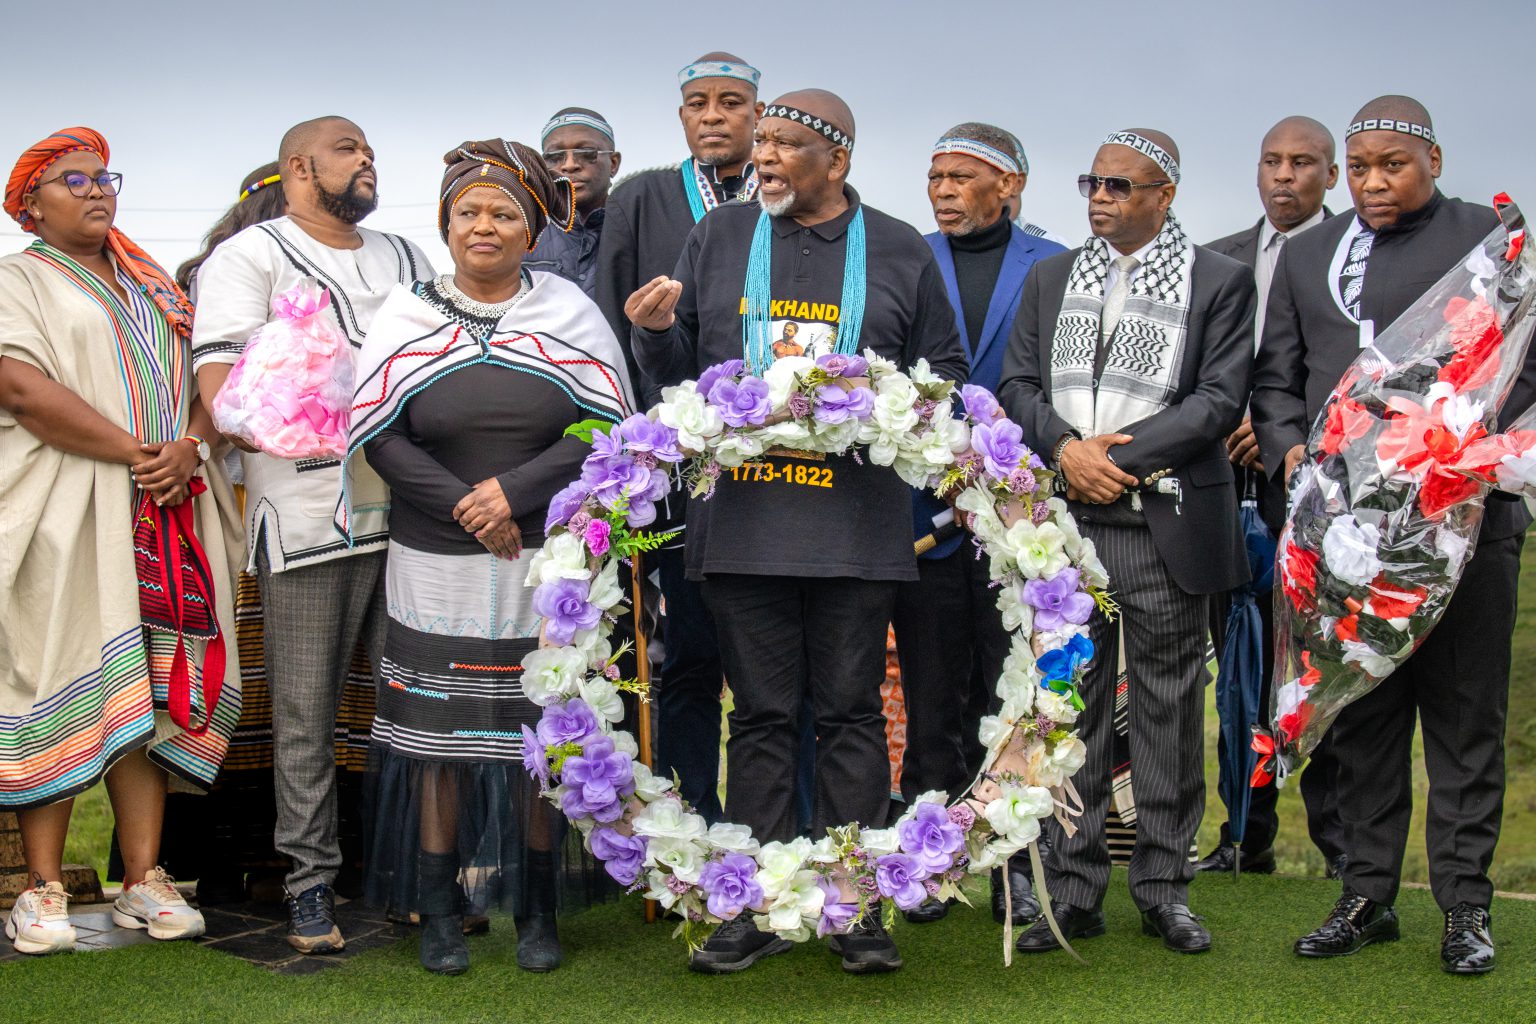 Makana Municipality councillor, Ramie Xonxa, centre, delivering a speech during a wreath-laying ceremony at the Egazini Battlefield in Makhanda, where thousands of Xhosa soldiers perished during the Battle of Egazini more than 200 years ago. Picture: Sibongiseni Maphumulo